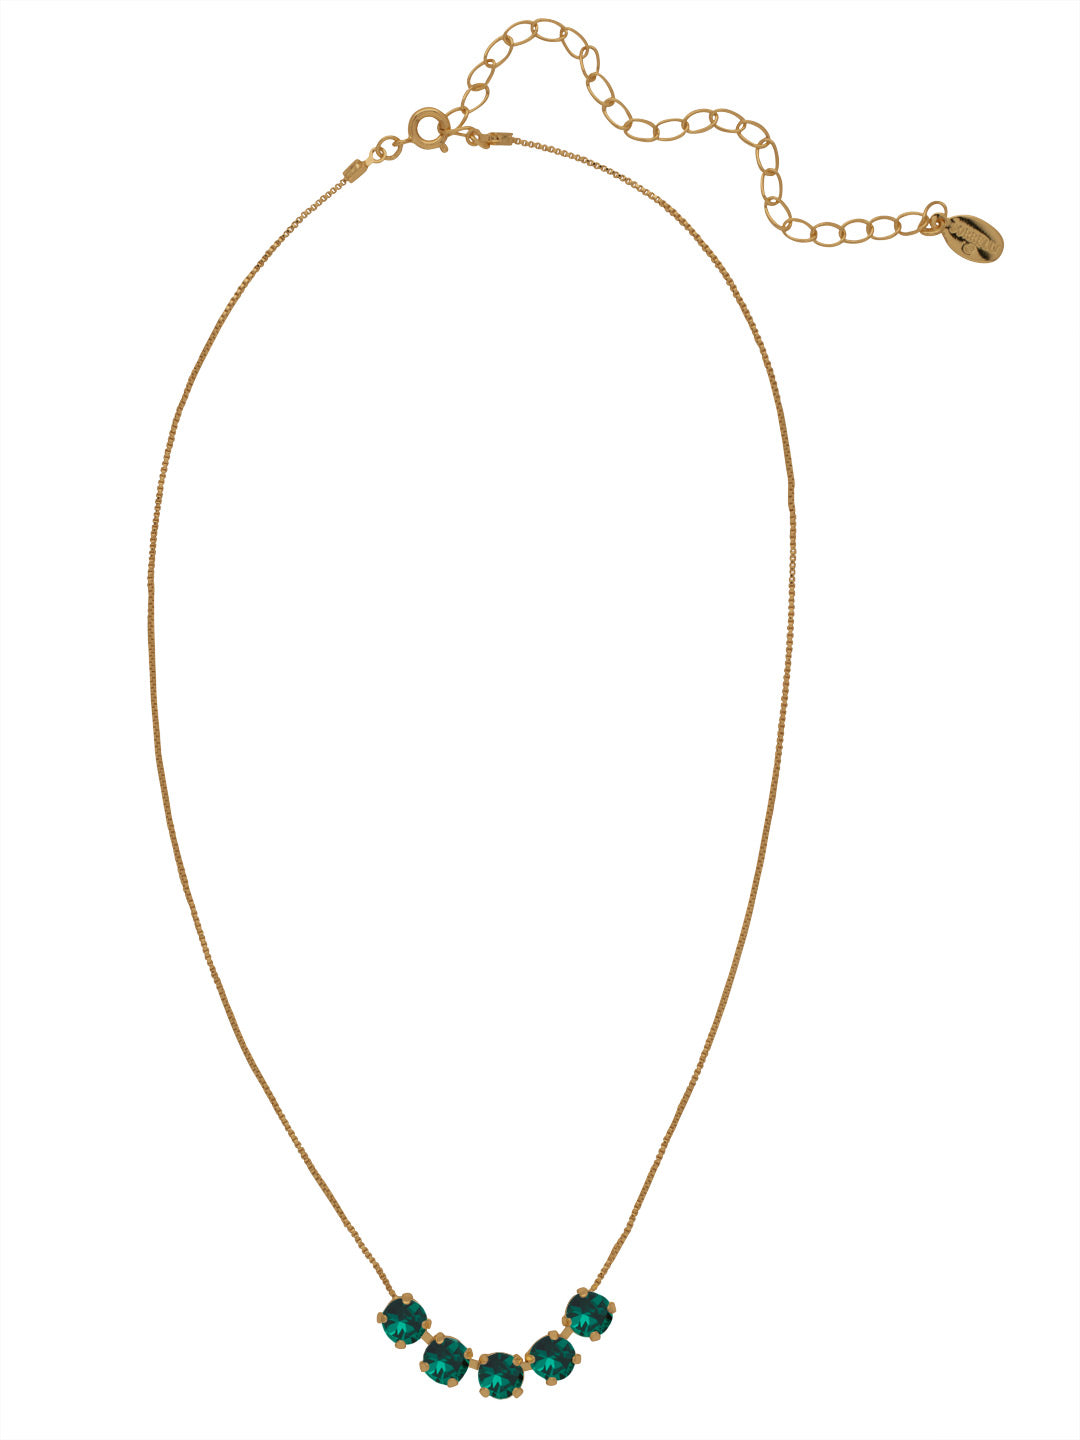 Shaughna Tennis Necklace - NFC84AGEME - <p>The Shaughna Tennis Necklace features five crystals on a delicate adjustable chain. From Sorrelli's Emerald collection in our Antique Gold-tone finish.</p>